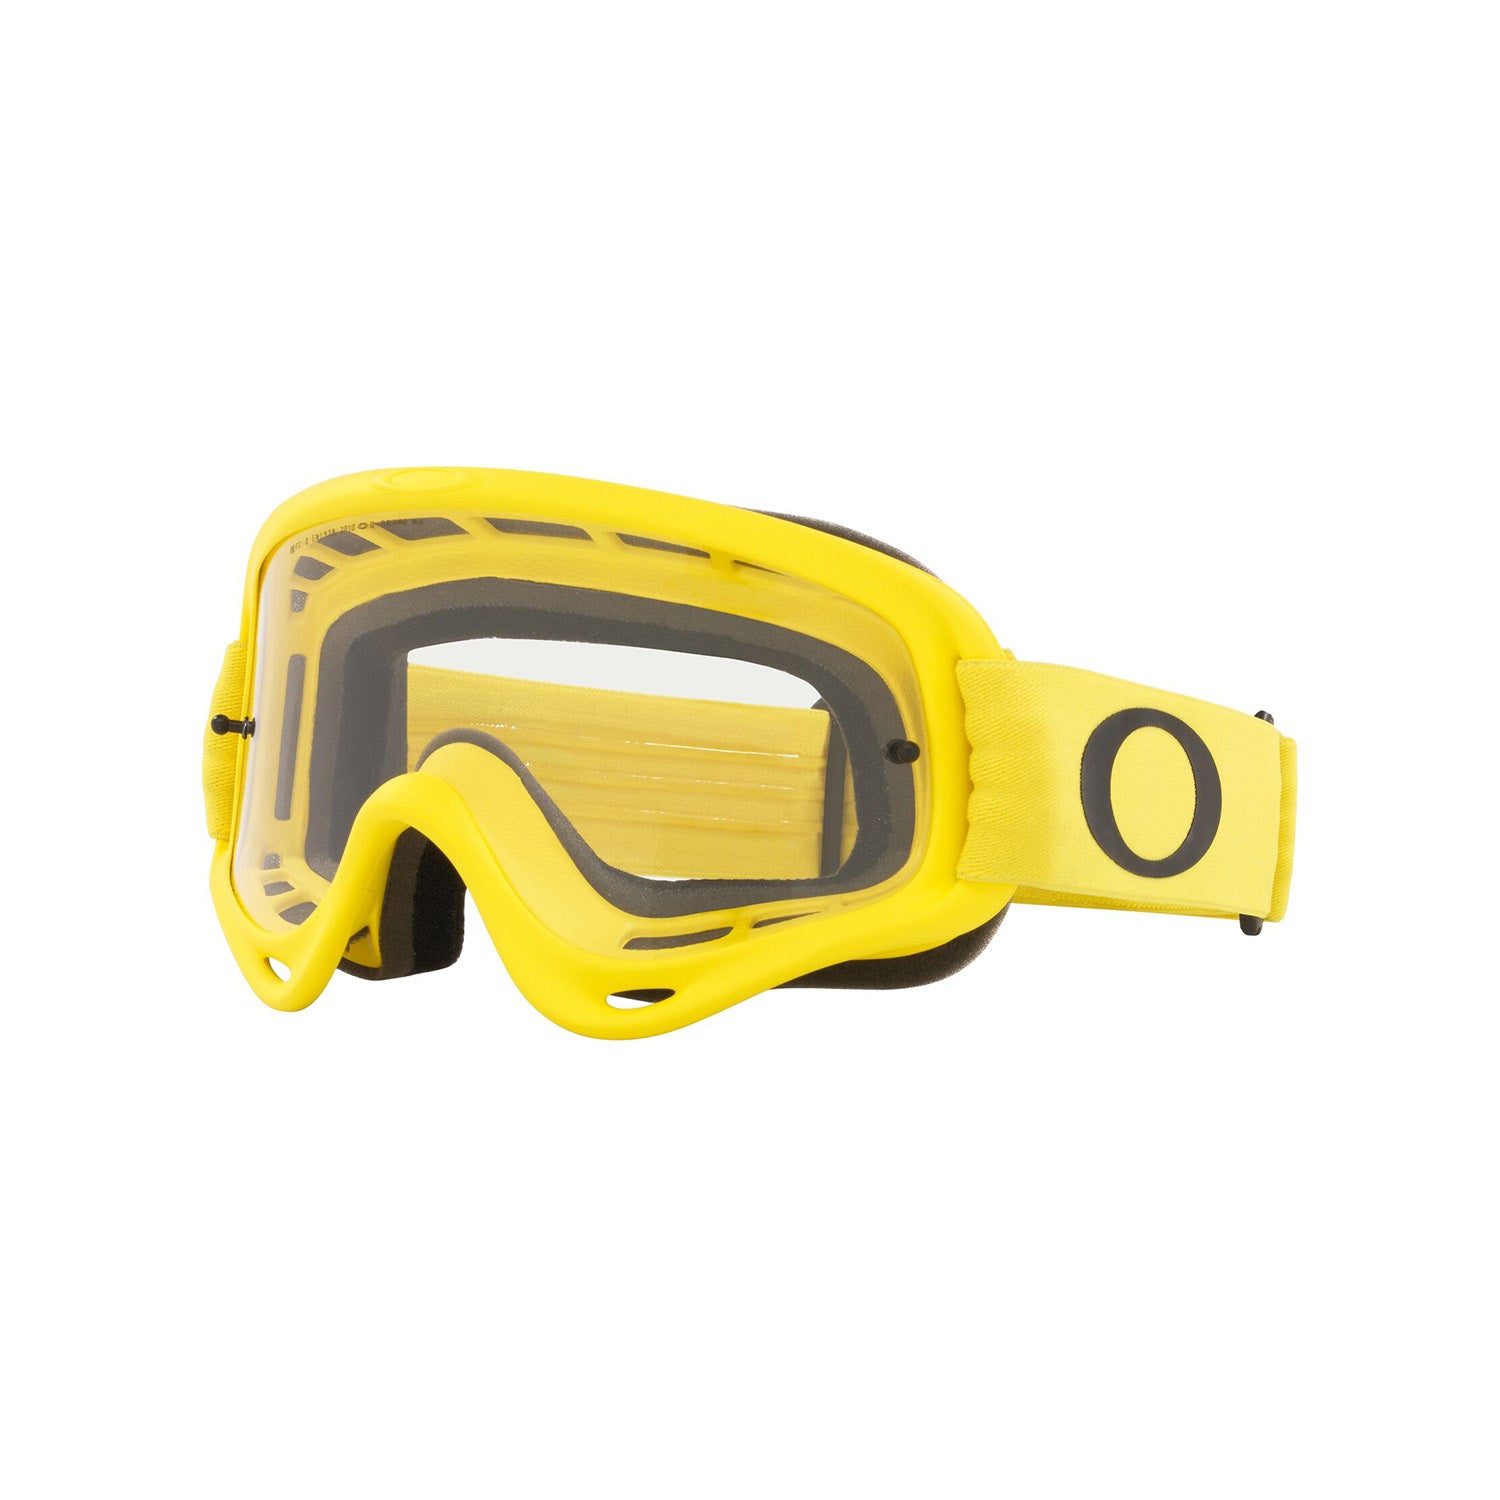 Oakley O Frame MX Goggle in Moto Yellow with Clear Lens